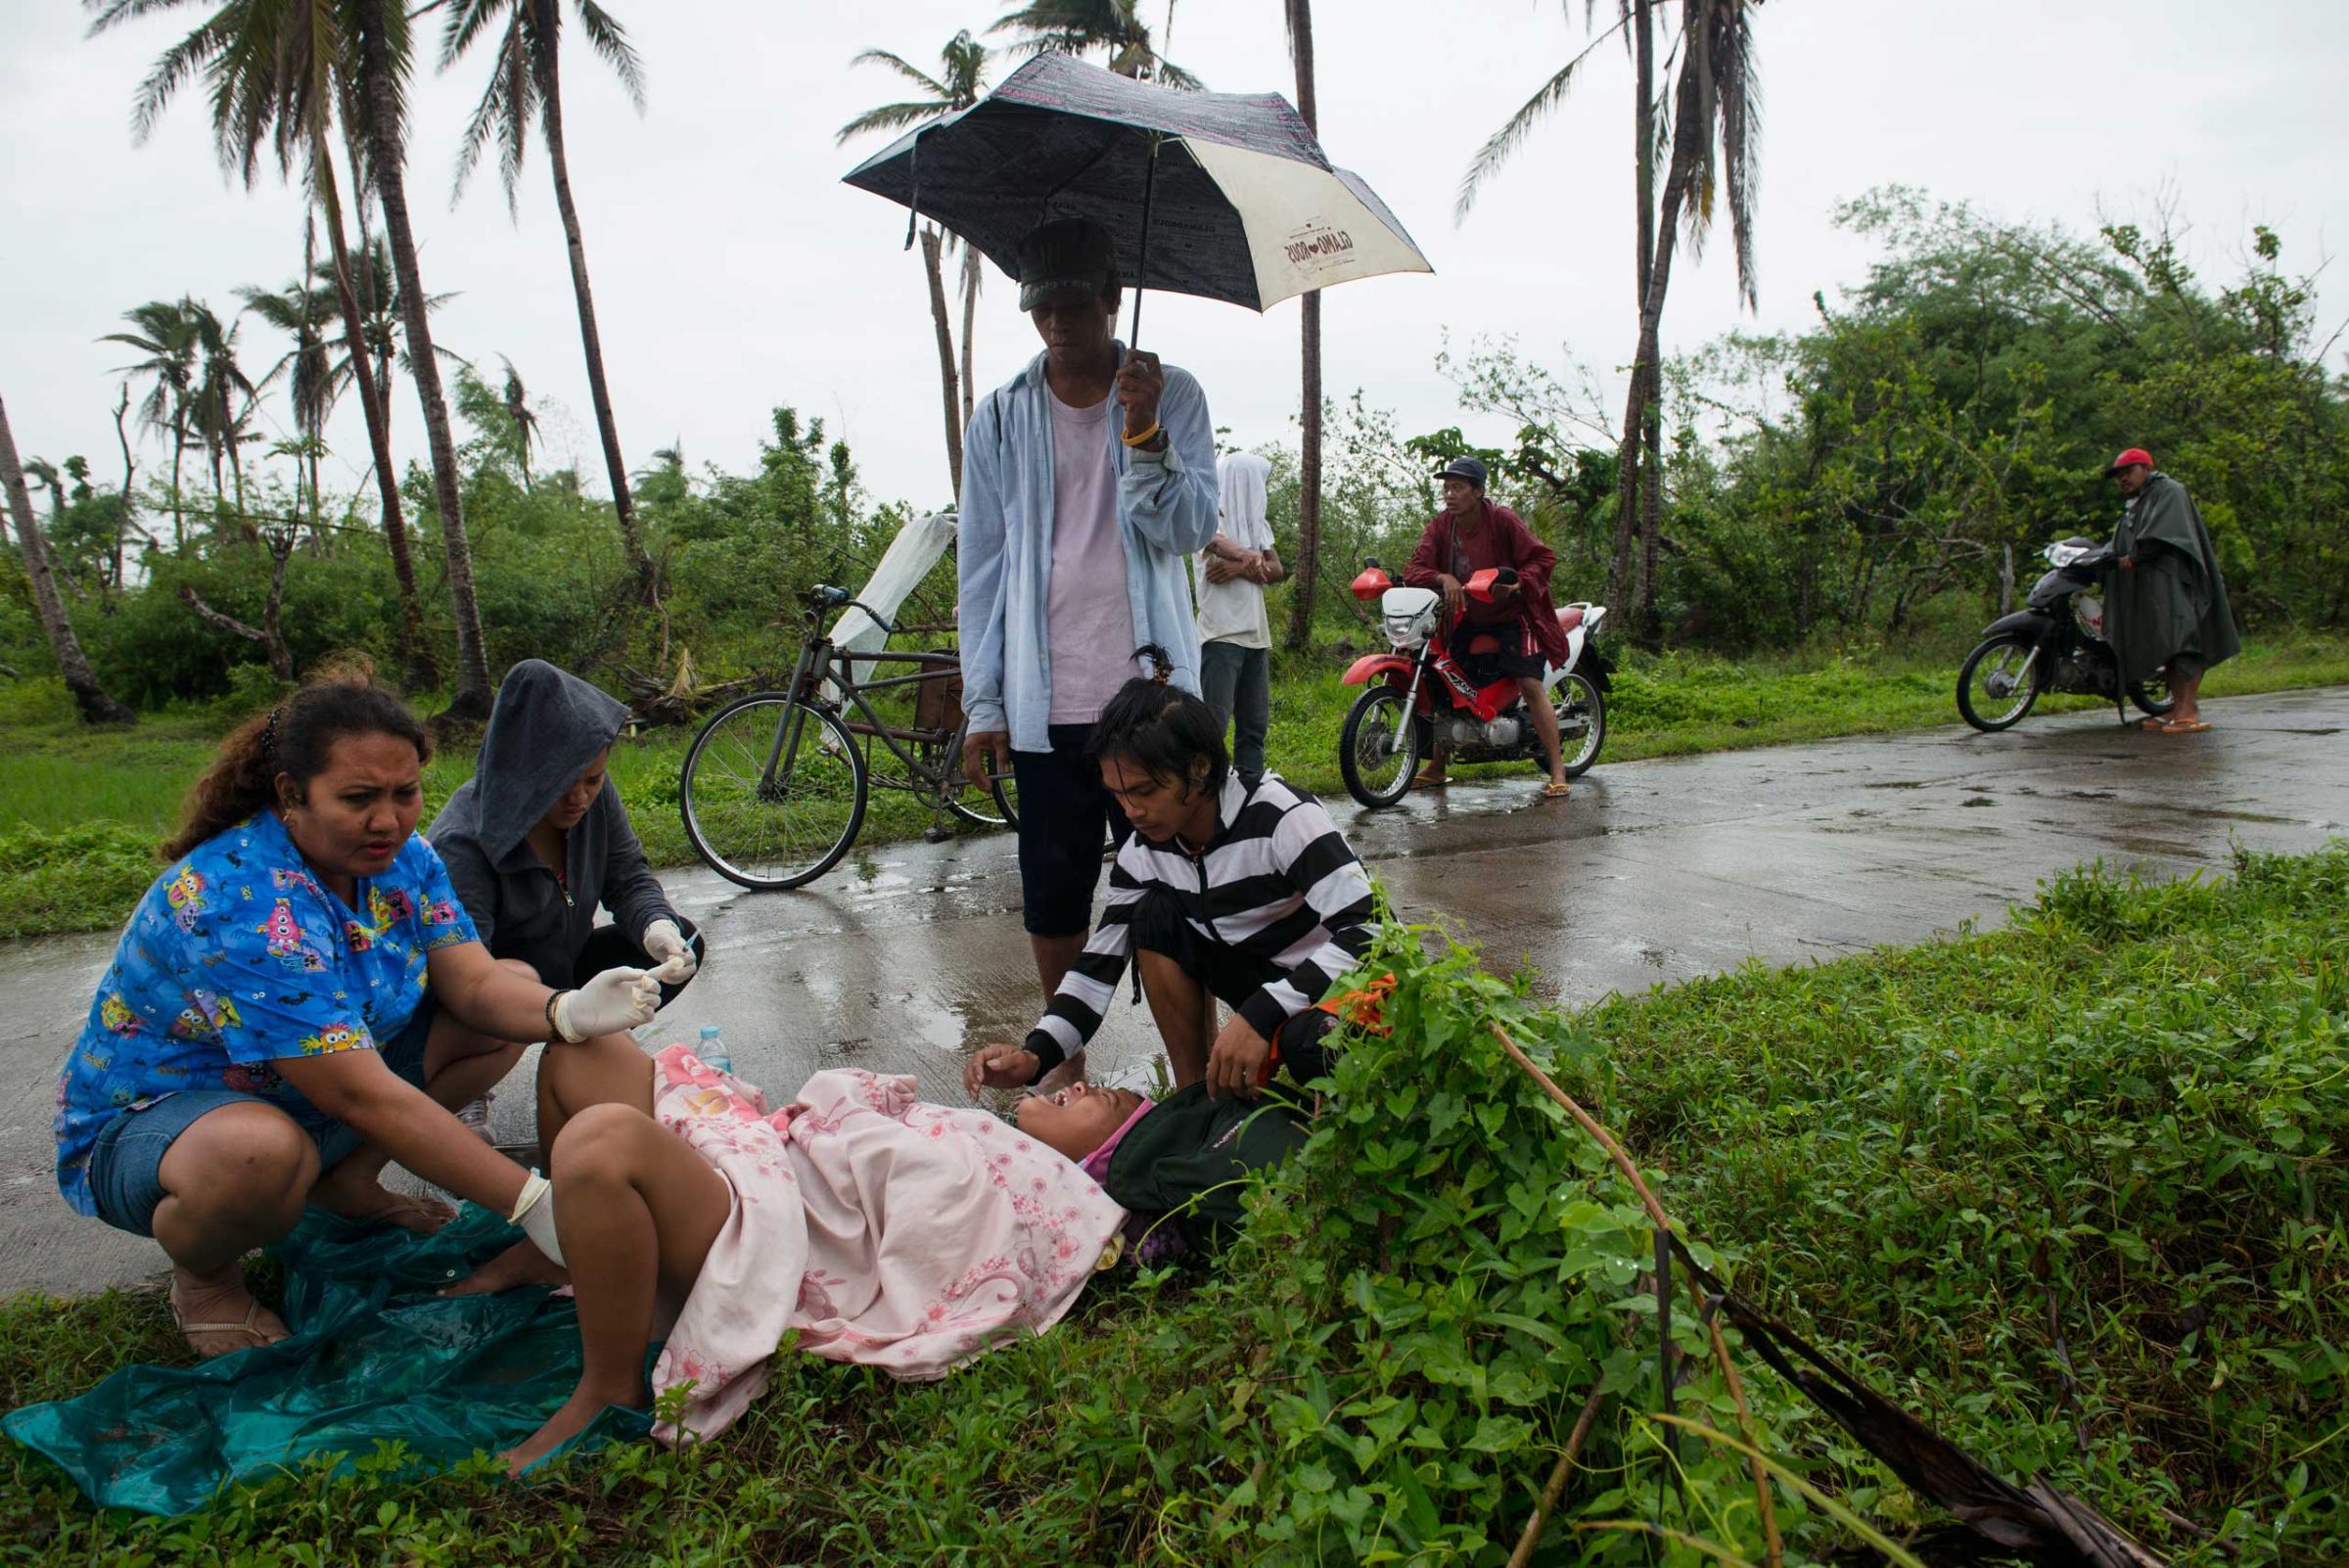 Midwife Norena Malate delivers the baby of Analyn Pesado 18, as Analyn's husband, Ryan Bacate, 21, looks on on the side of the road in Tolosa, outside of Tacloban, in the Philippines, Jan. 11, 2014.